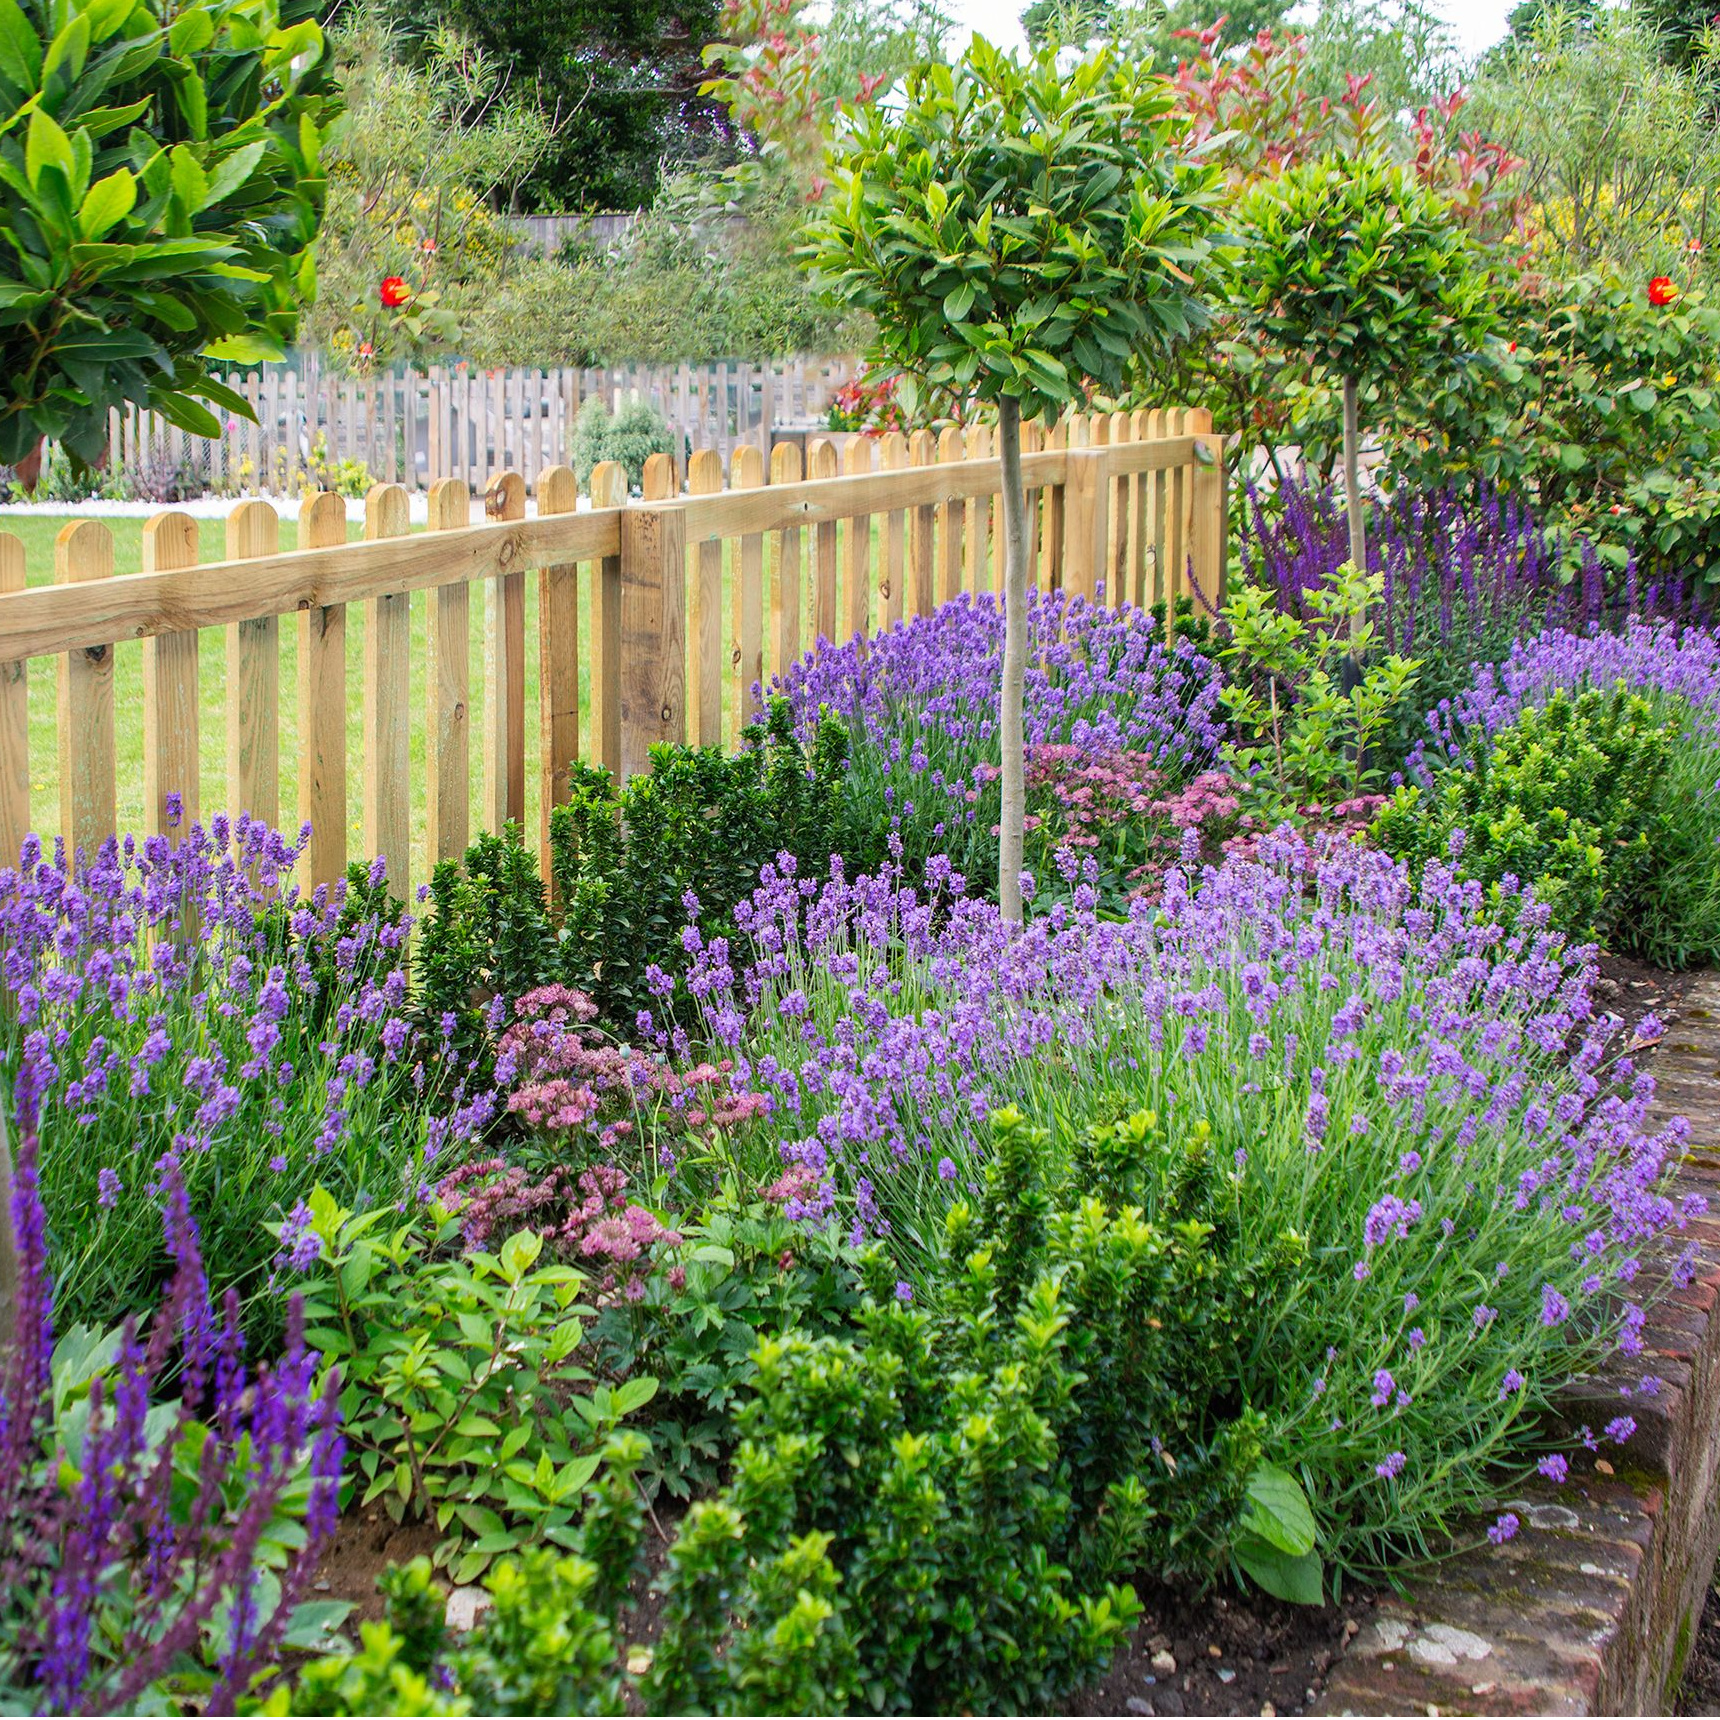 Why You Should Be Growing Lavender - The Ultimate Perennial!